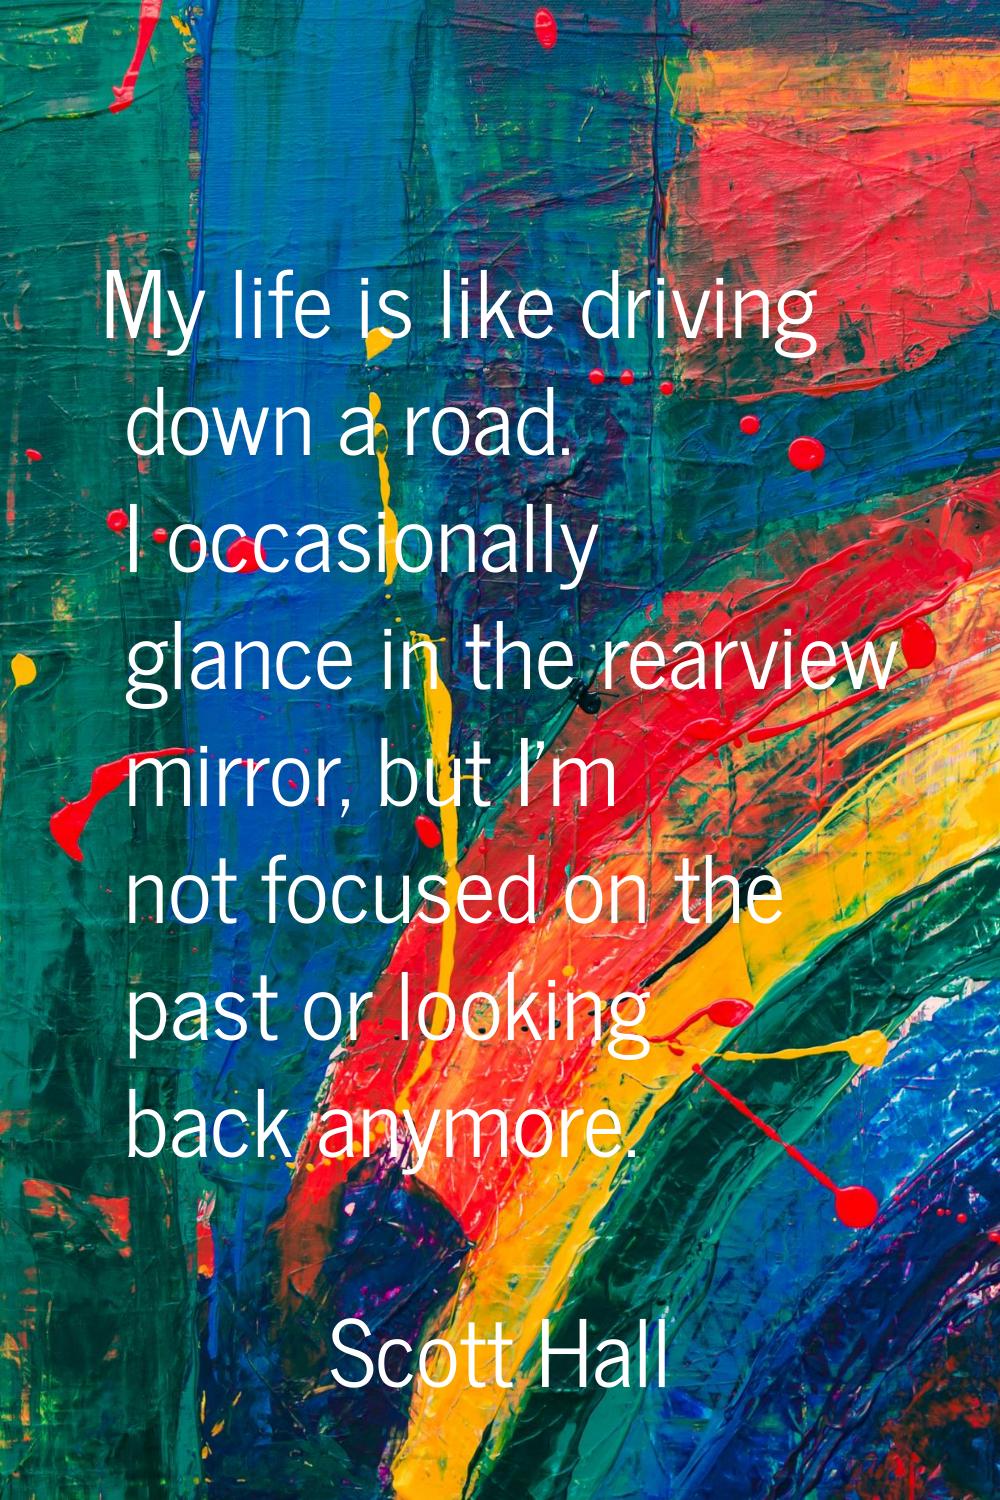 My life is like driving down a road. I occasionally glance in the rearview mirror, but I'm not focu